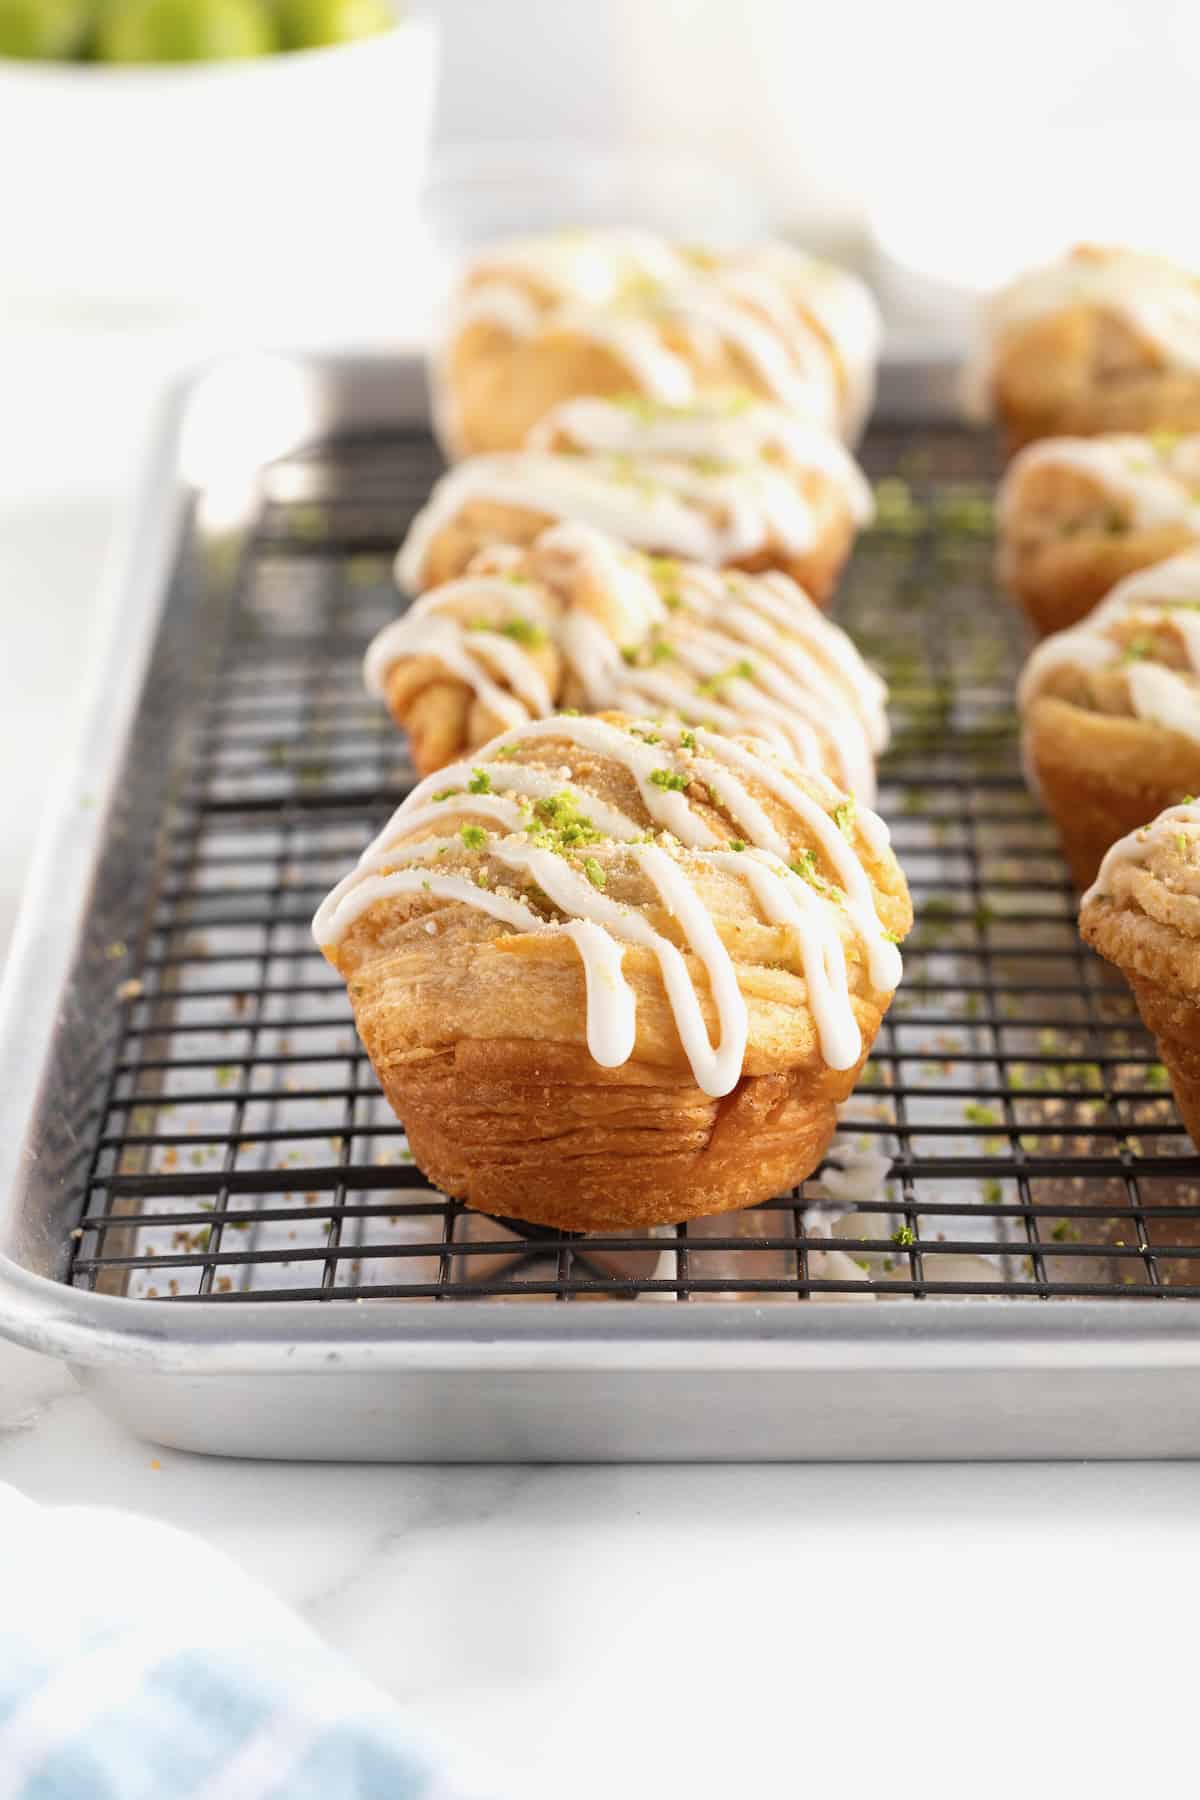 An aluminum baking pan with a wire cooling rack on top holding key lime cruffins garnished with lime zest and graham cracker crumbs.